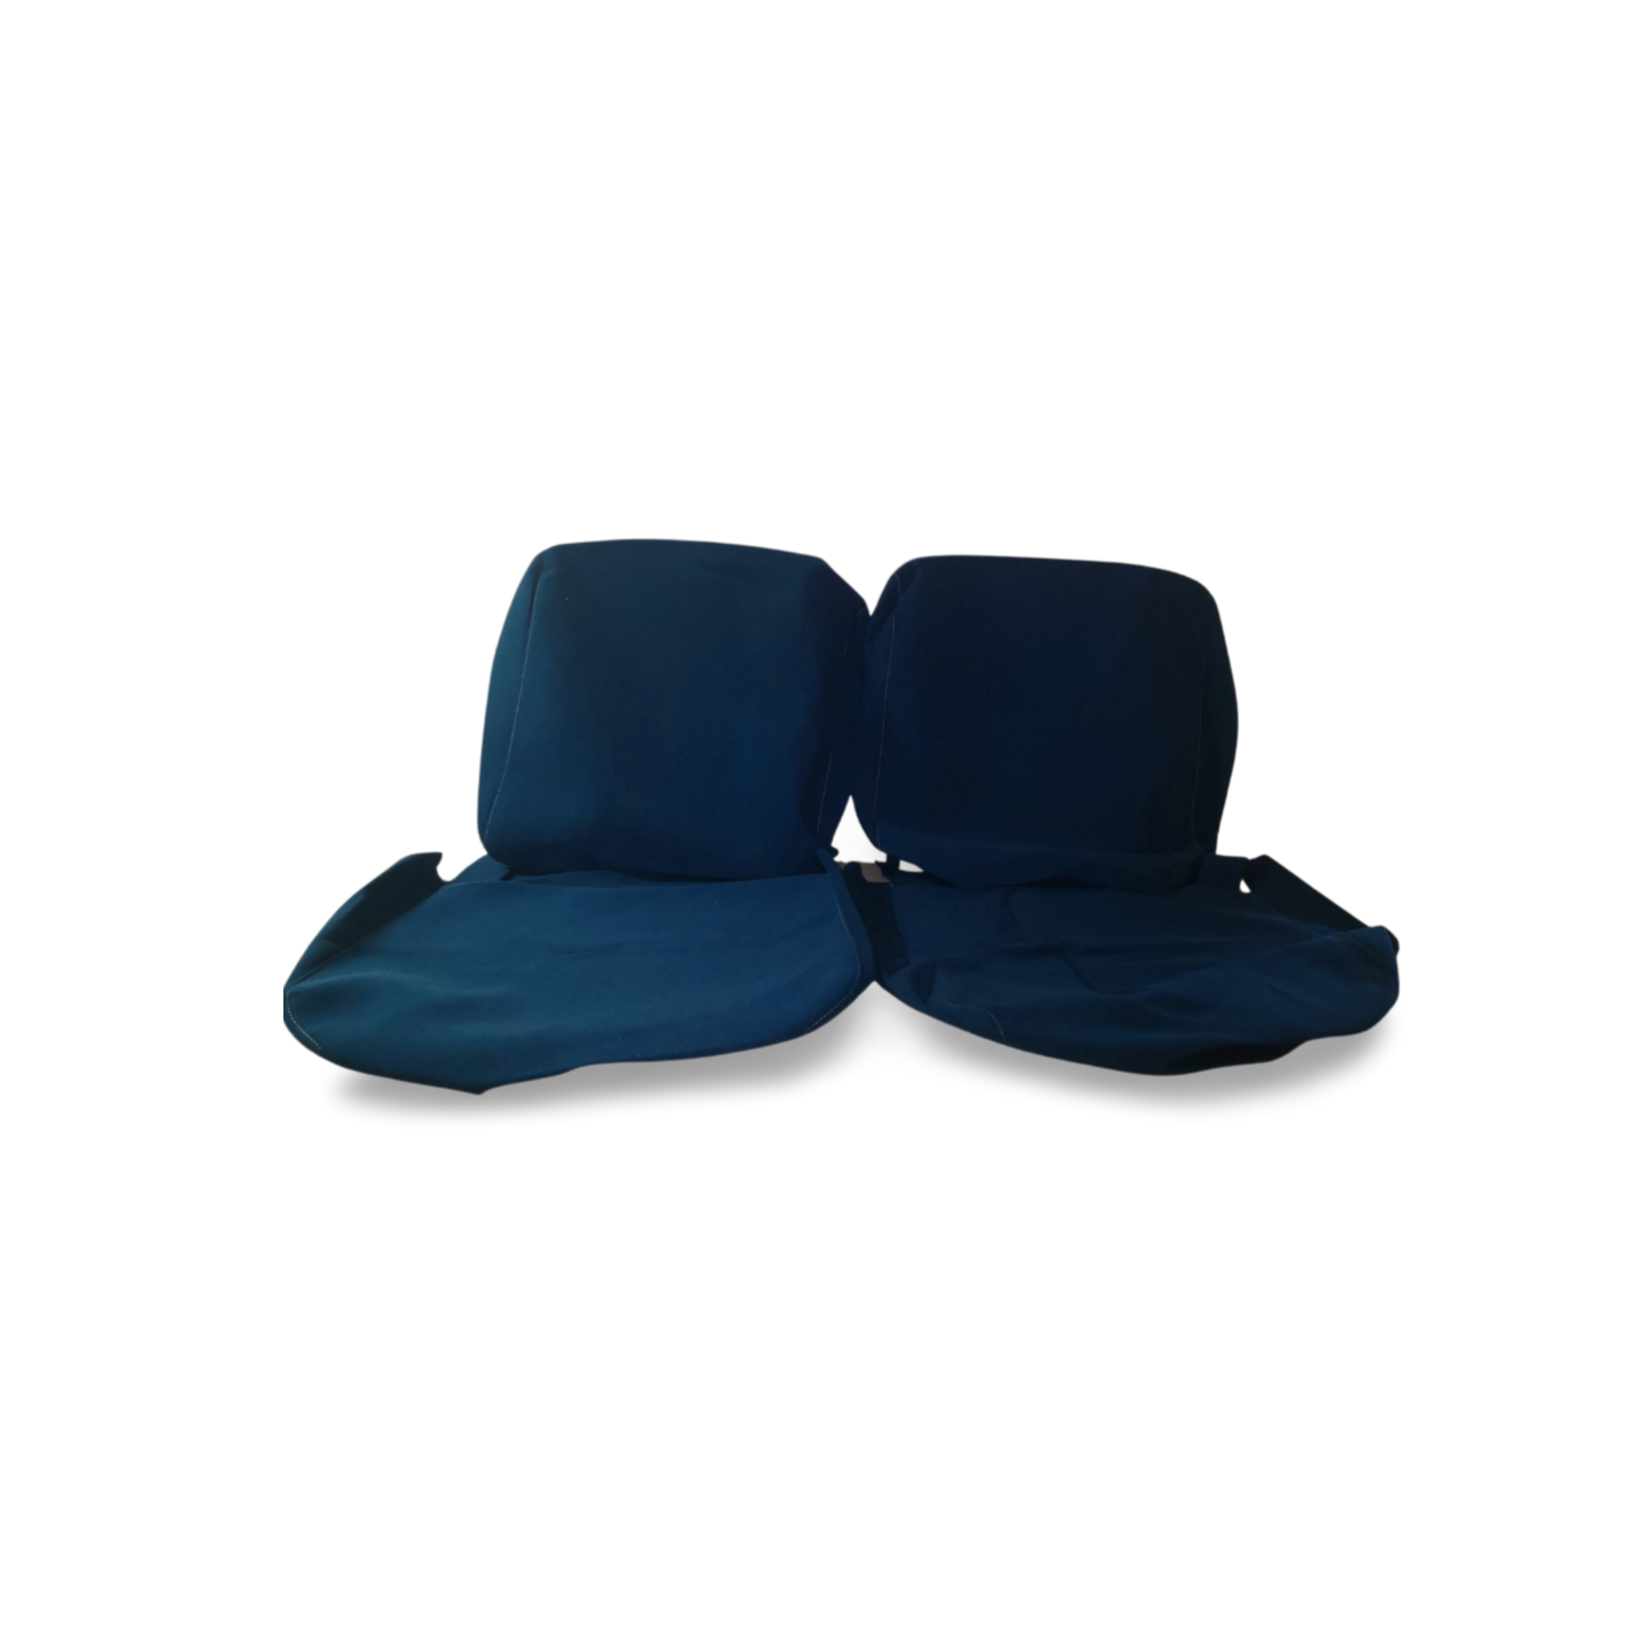 Upholstery set Jersey blue 63/74 (with armrest bench 14cm) non Pallas -07/62 Nr Org: Interior - Image 63/74